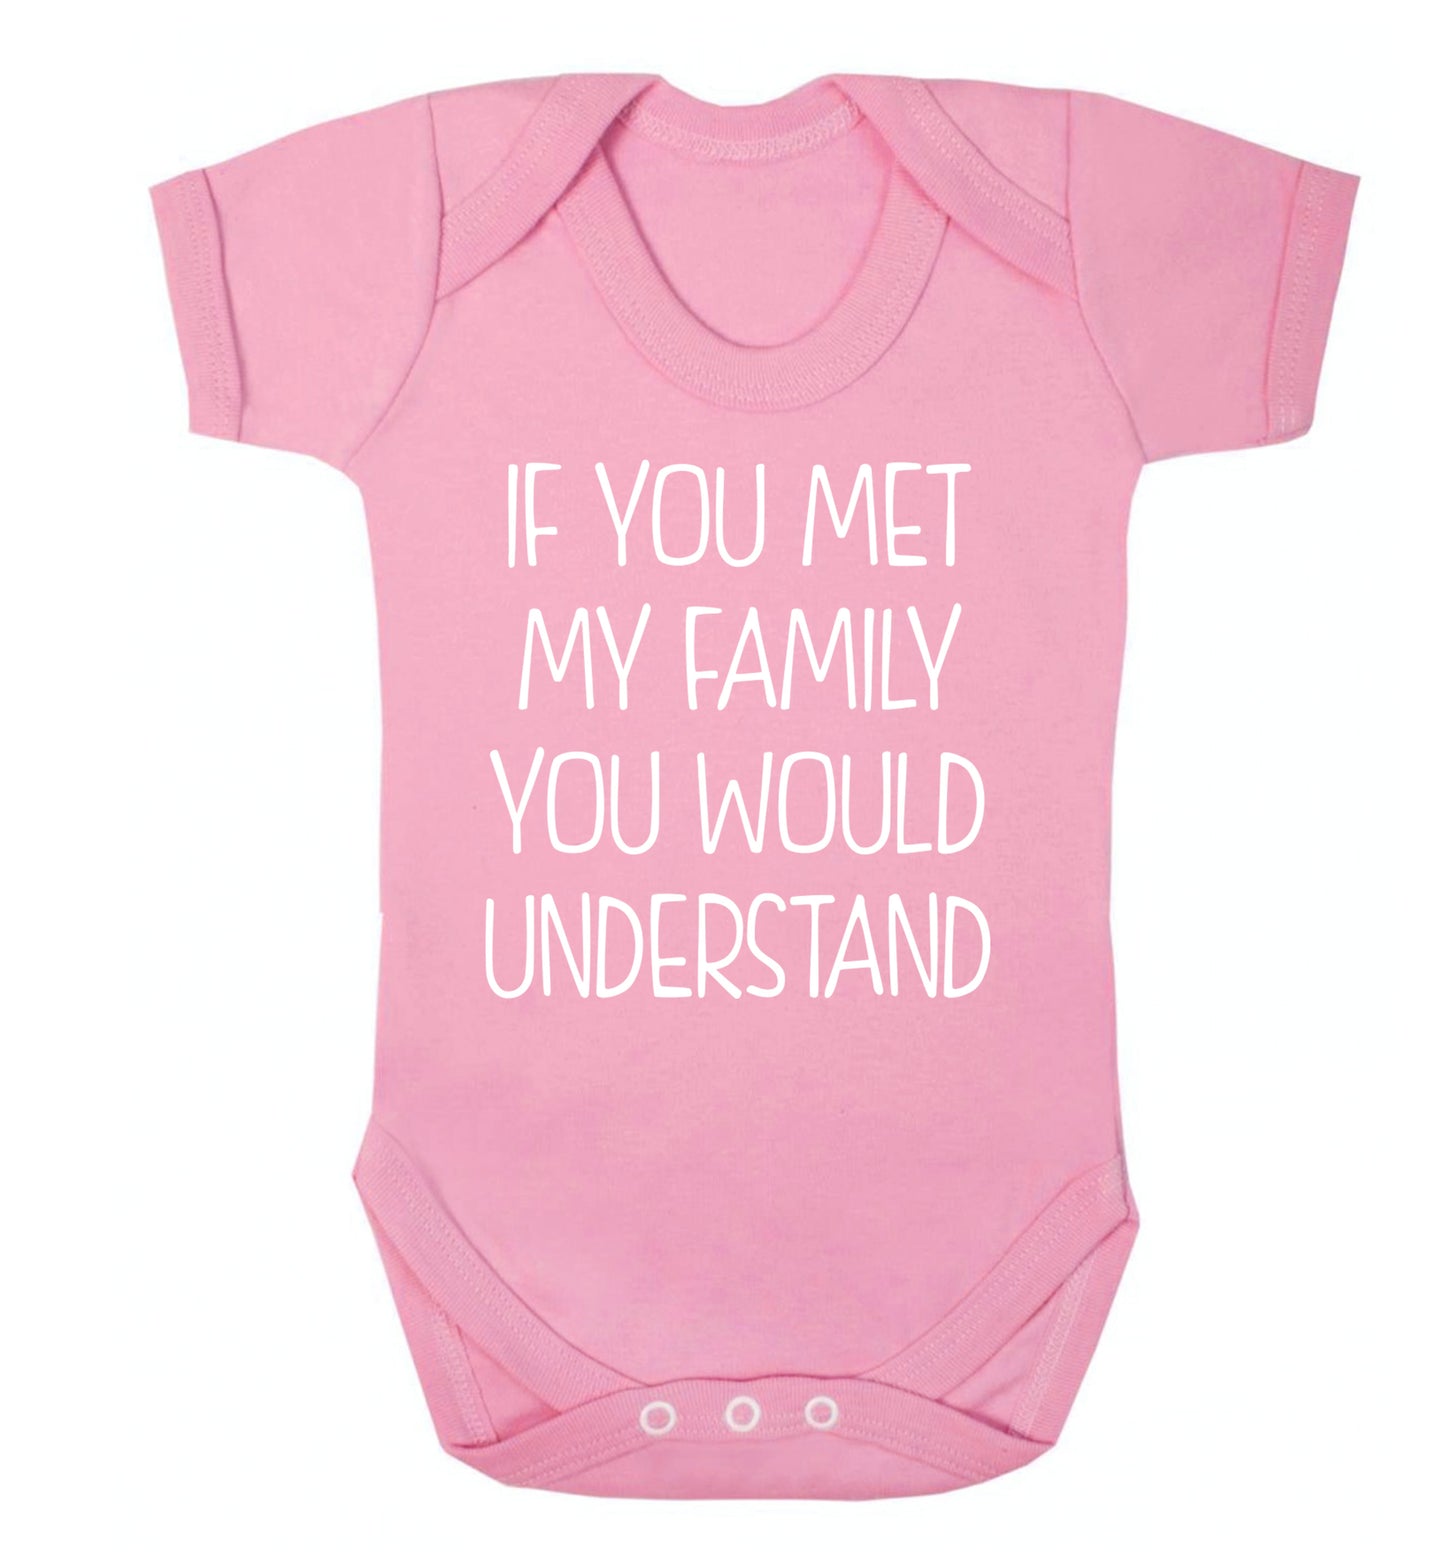 If you met my family you would understand Baby Vest pale pink 18-24 months